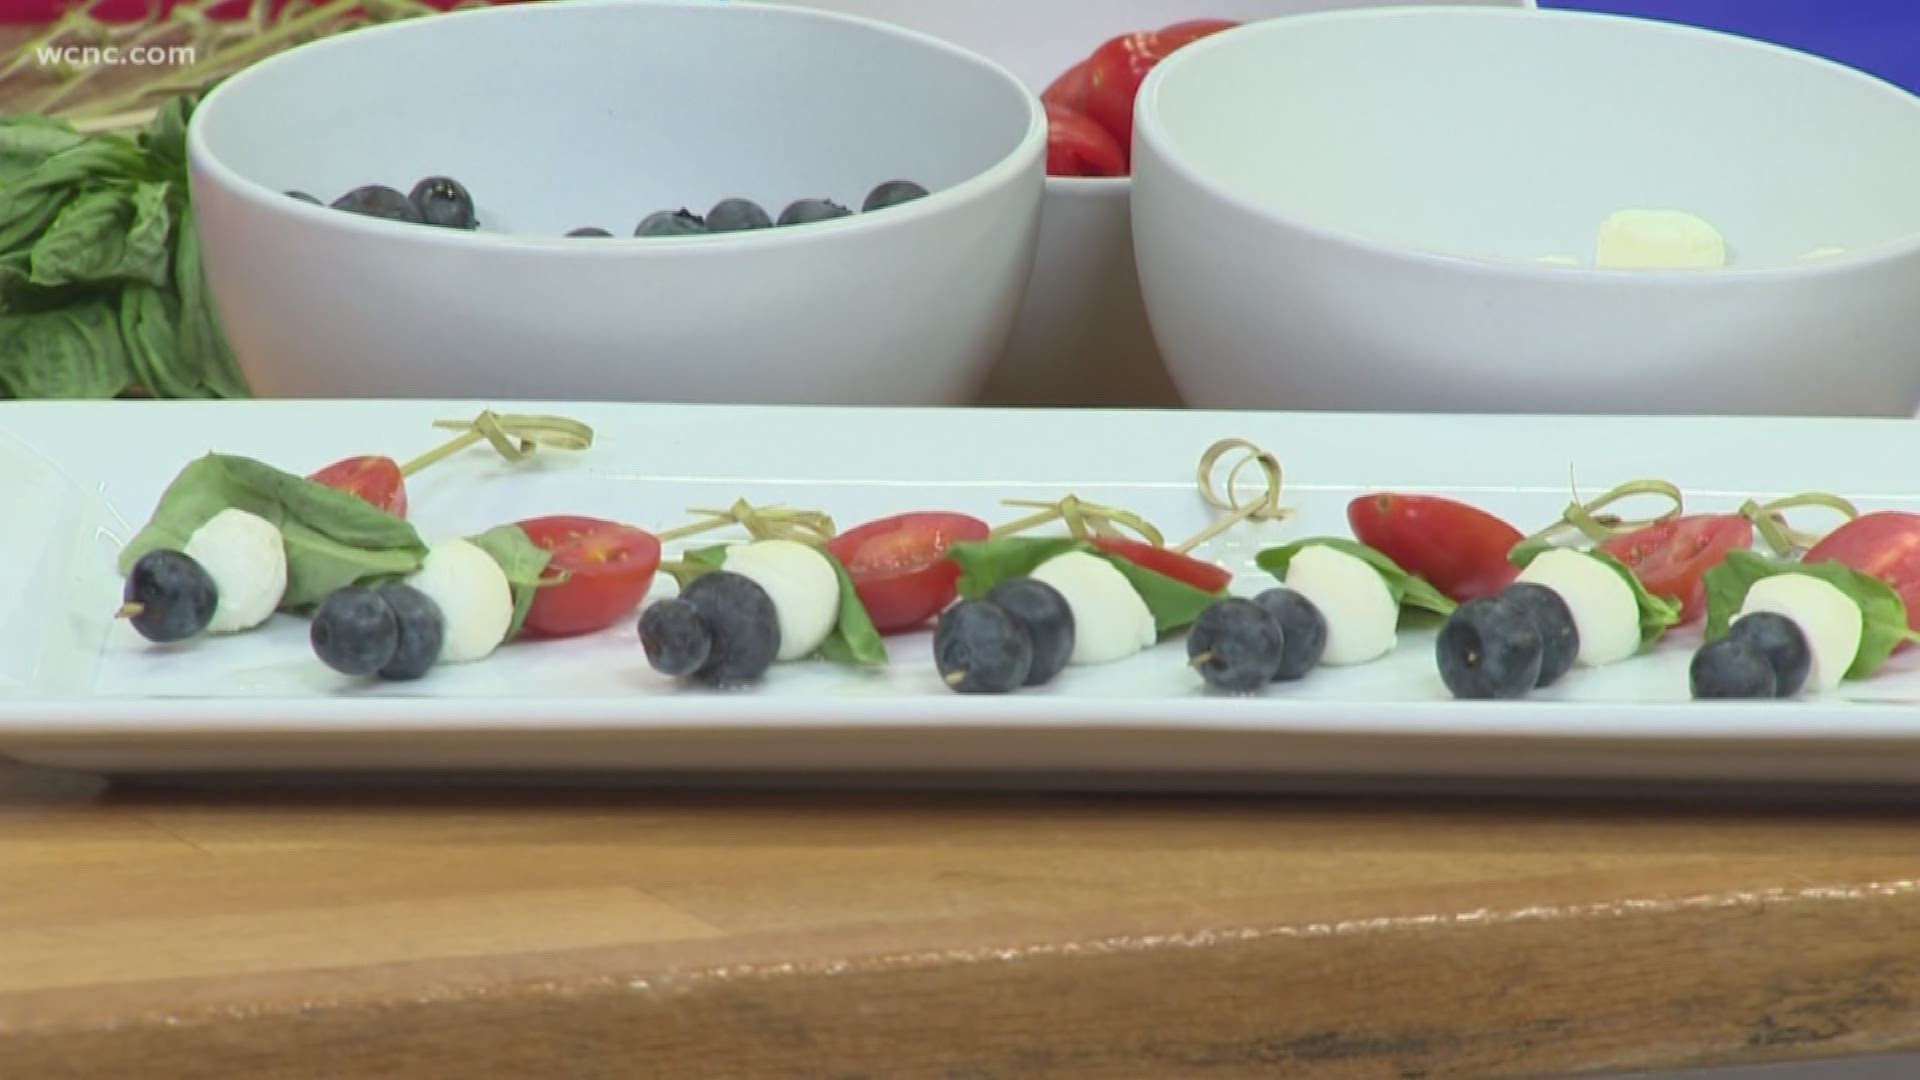 If you’re planning a Fourth of July party, check out these creative food and drink ideas from Roots Catering and Café.